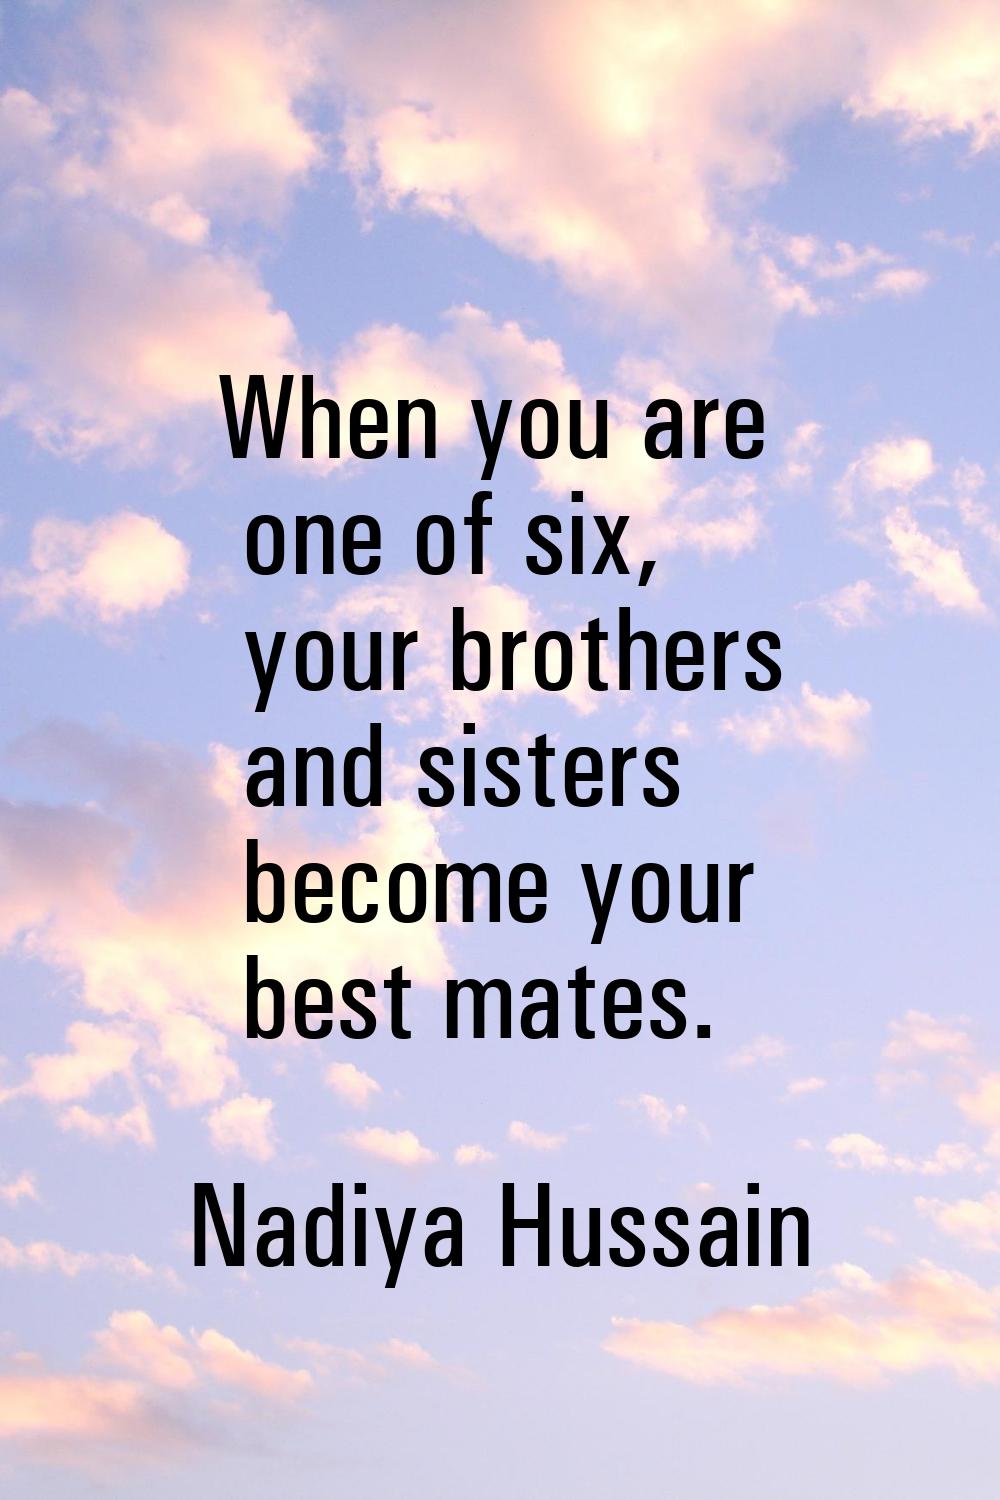 When you are one of six, your brothers and sisters become your best mates.